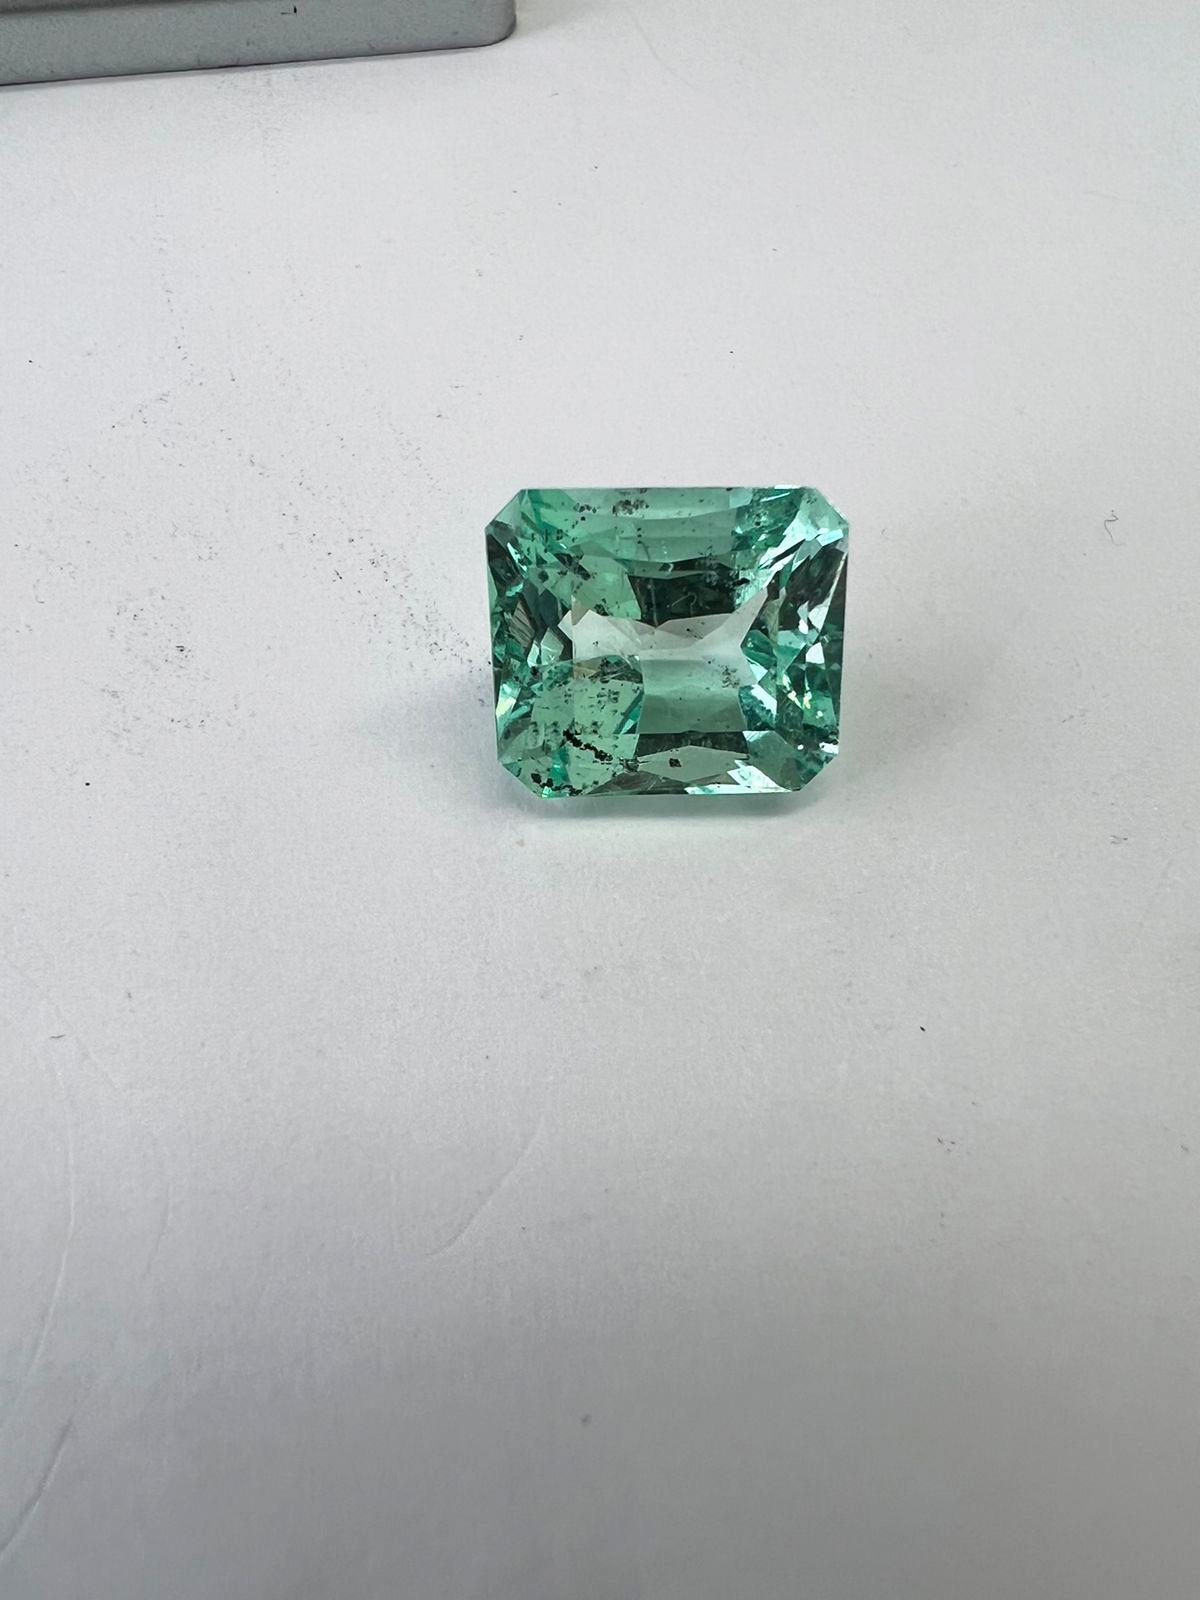 8.70 Ct. Colombian Emerald